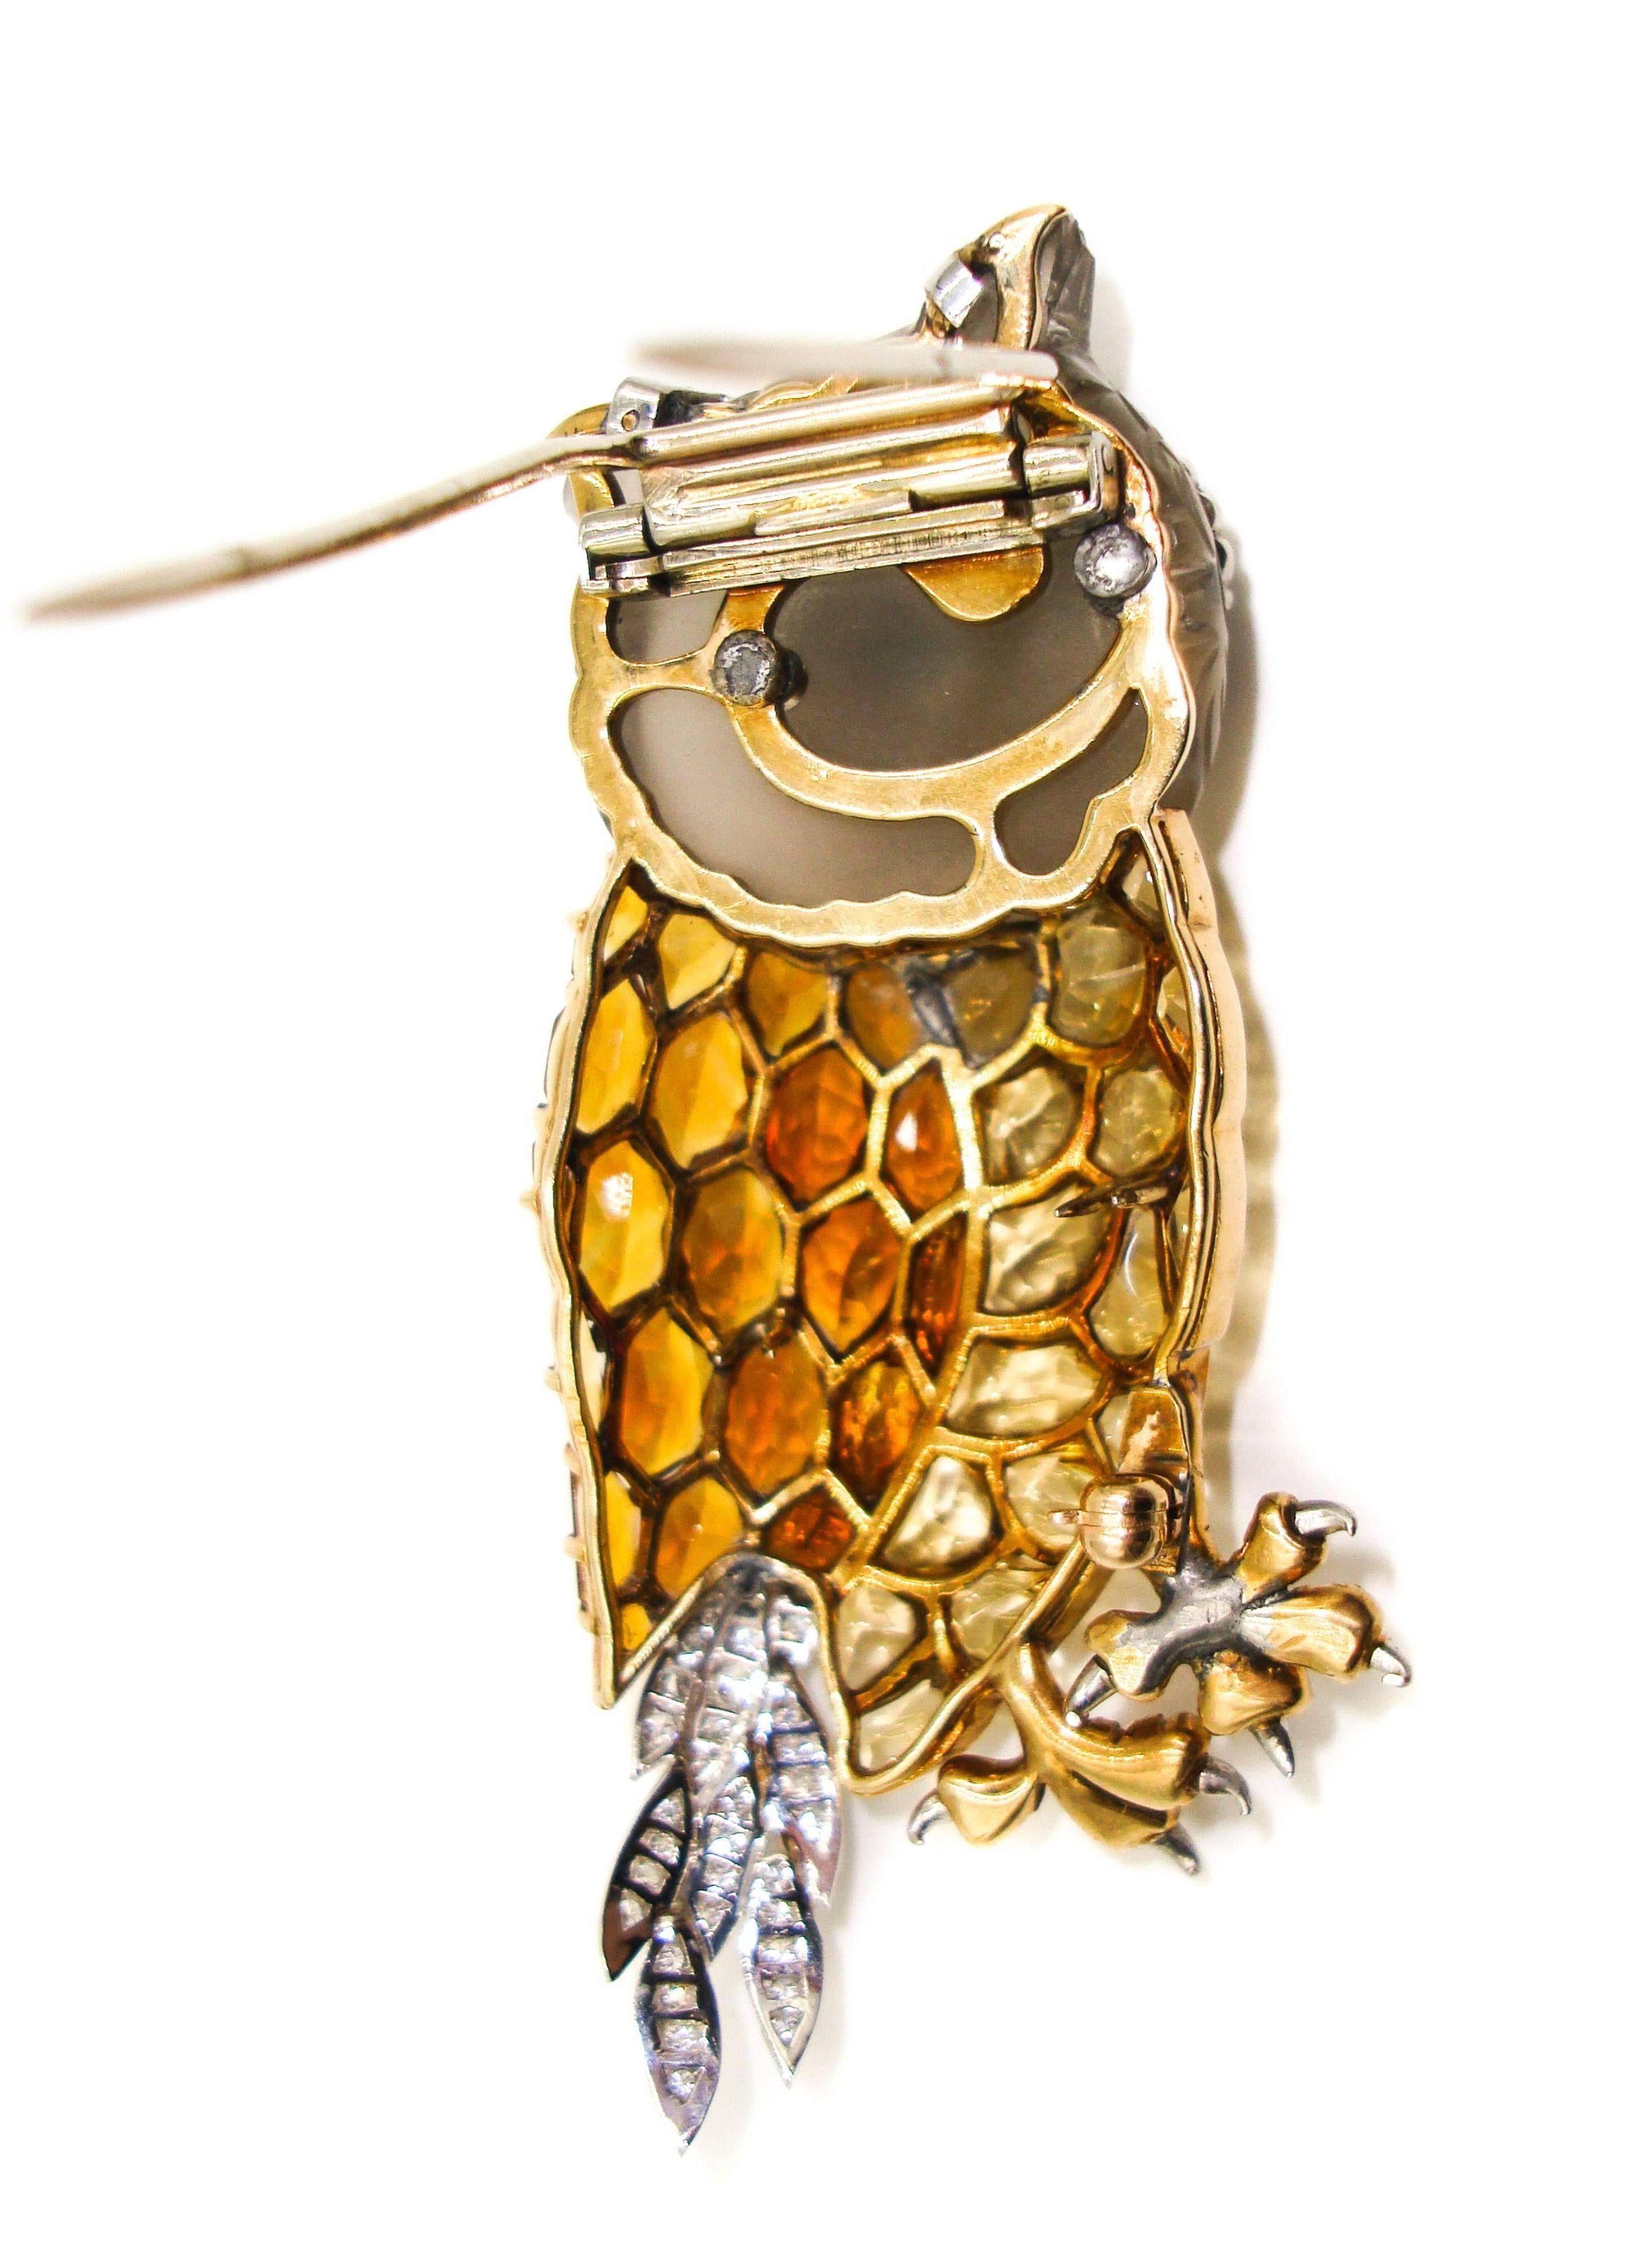 Nature is once again an inspiration to jewelry designers... 
This eye catching gold Owl brooch provides an unfaltering and unique look. 
Set in 14K yellow gold and comprised of yellow topaz, faceted citrine, carved smokey quartz, white round